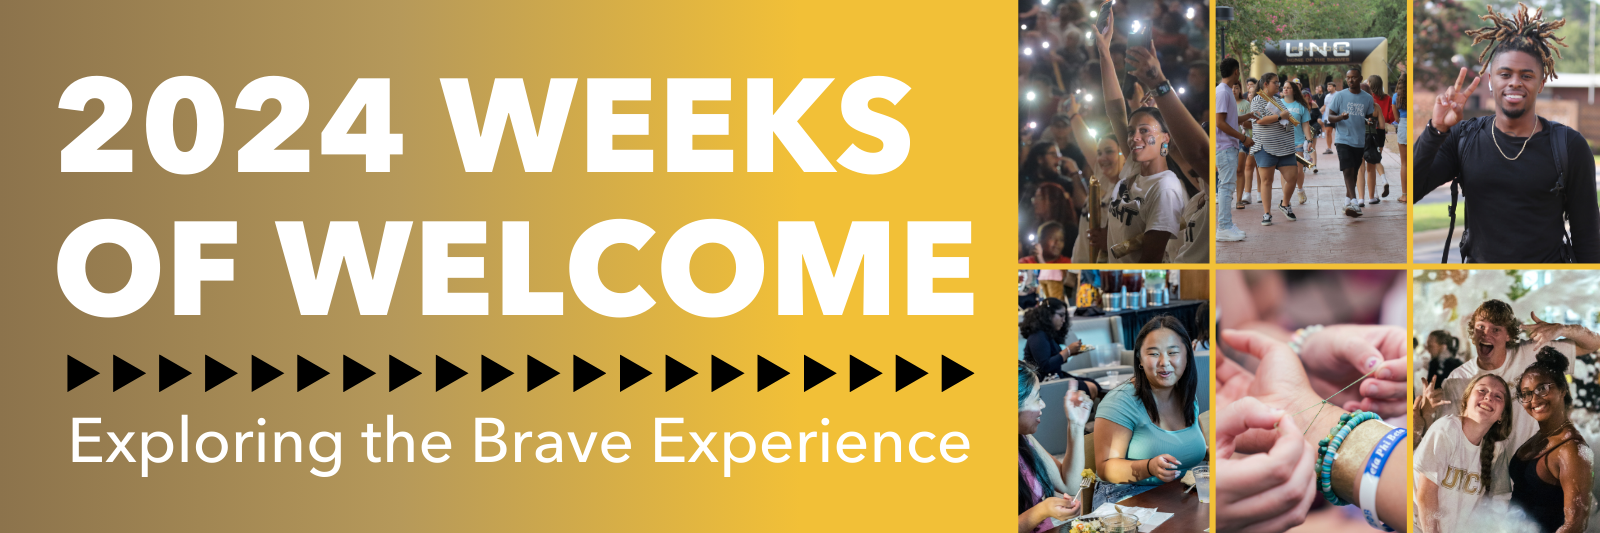 2024 Weeks of Welcome: Exploring the Brave Experience